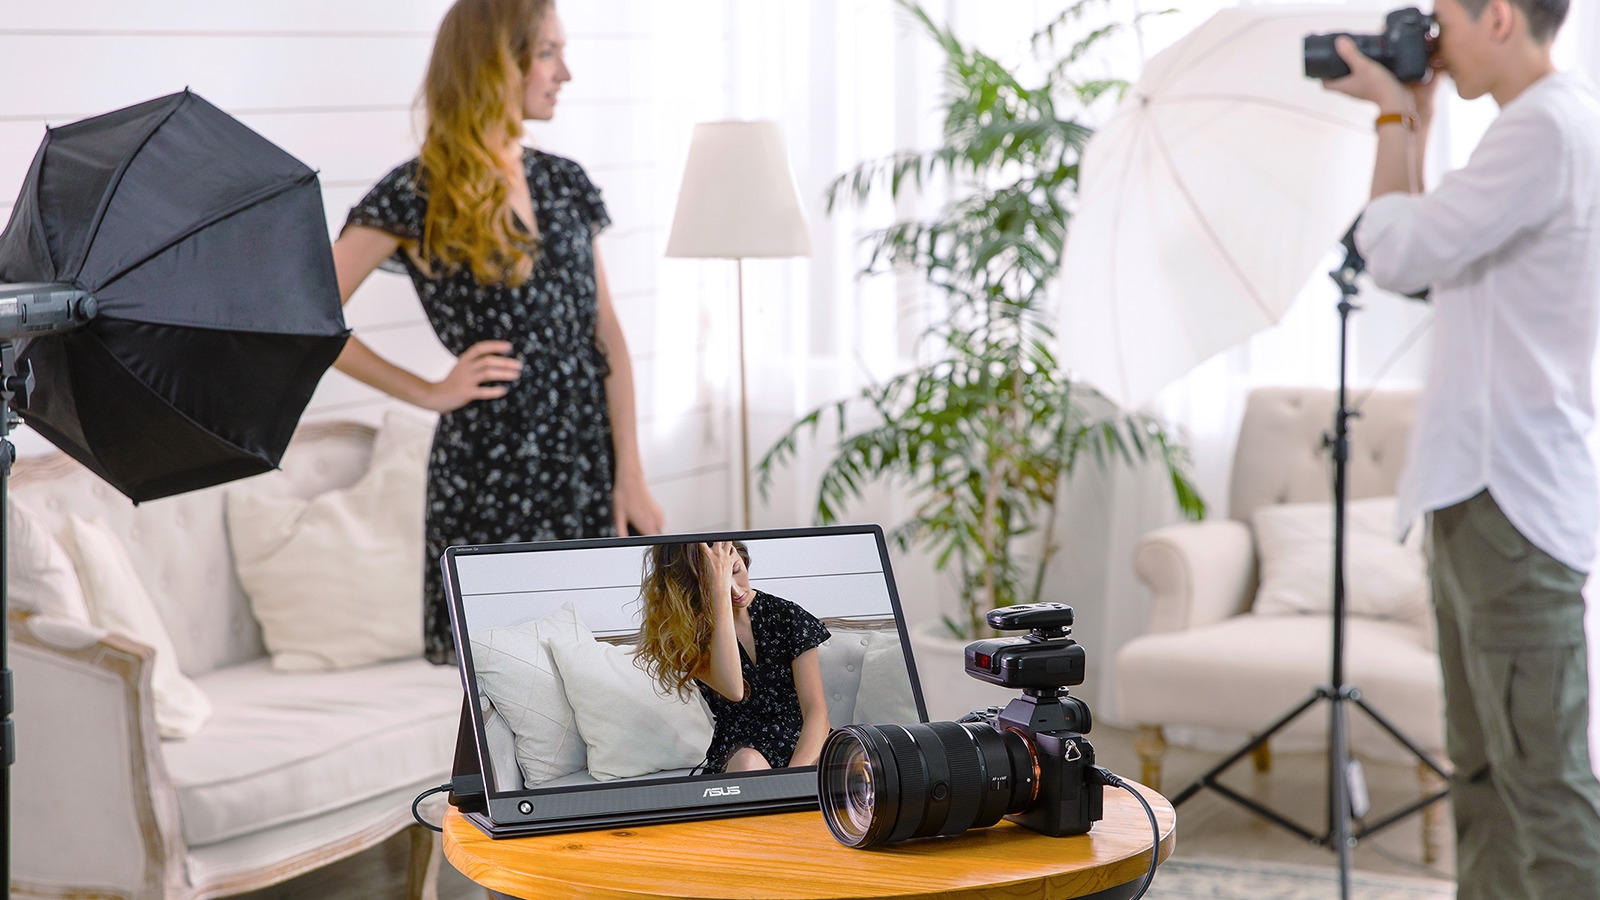 Asus Zenscreen Go in use in photographic setup